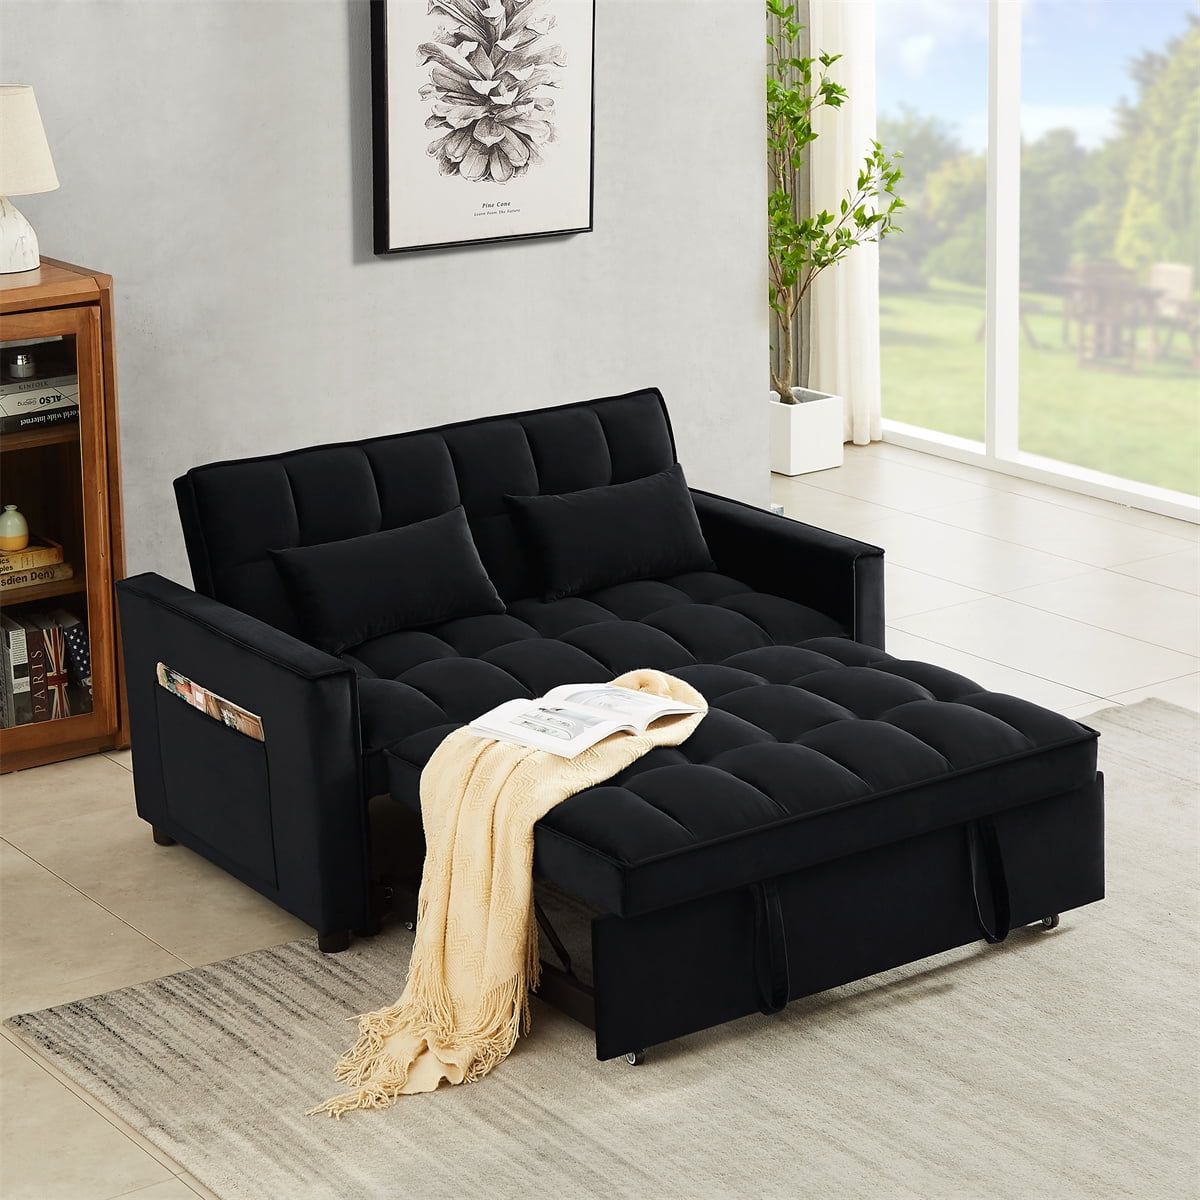 Convertible Sleeper Sofa Loveseat Sofa Bed Couch With Adjustable  Backrest,modern Velvet 2 Seater Sofa With Pull Out Bed,side Pocket And 2  Lumbar Pillows Lounge Chaise For Living Room Apartment,black – Walmart Intended For Black Velvet 2 Seater Sofa Beds (View 11 of 15)